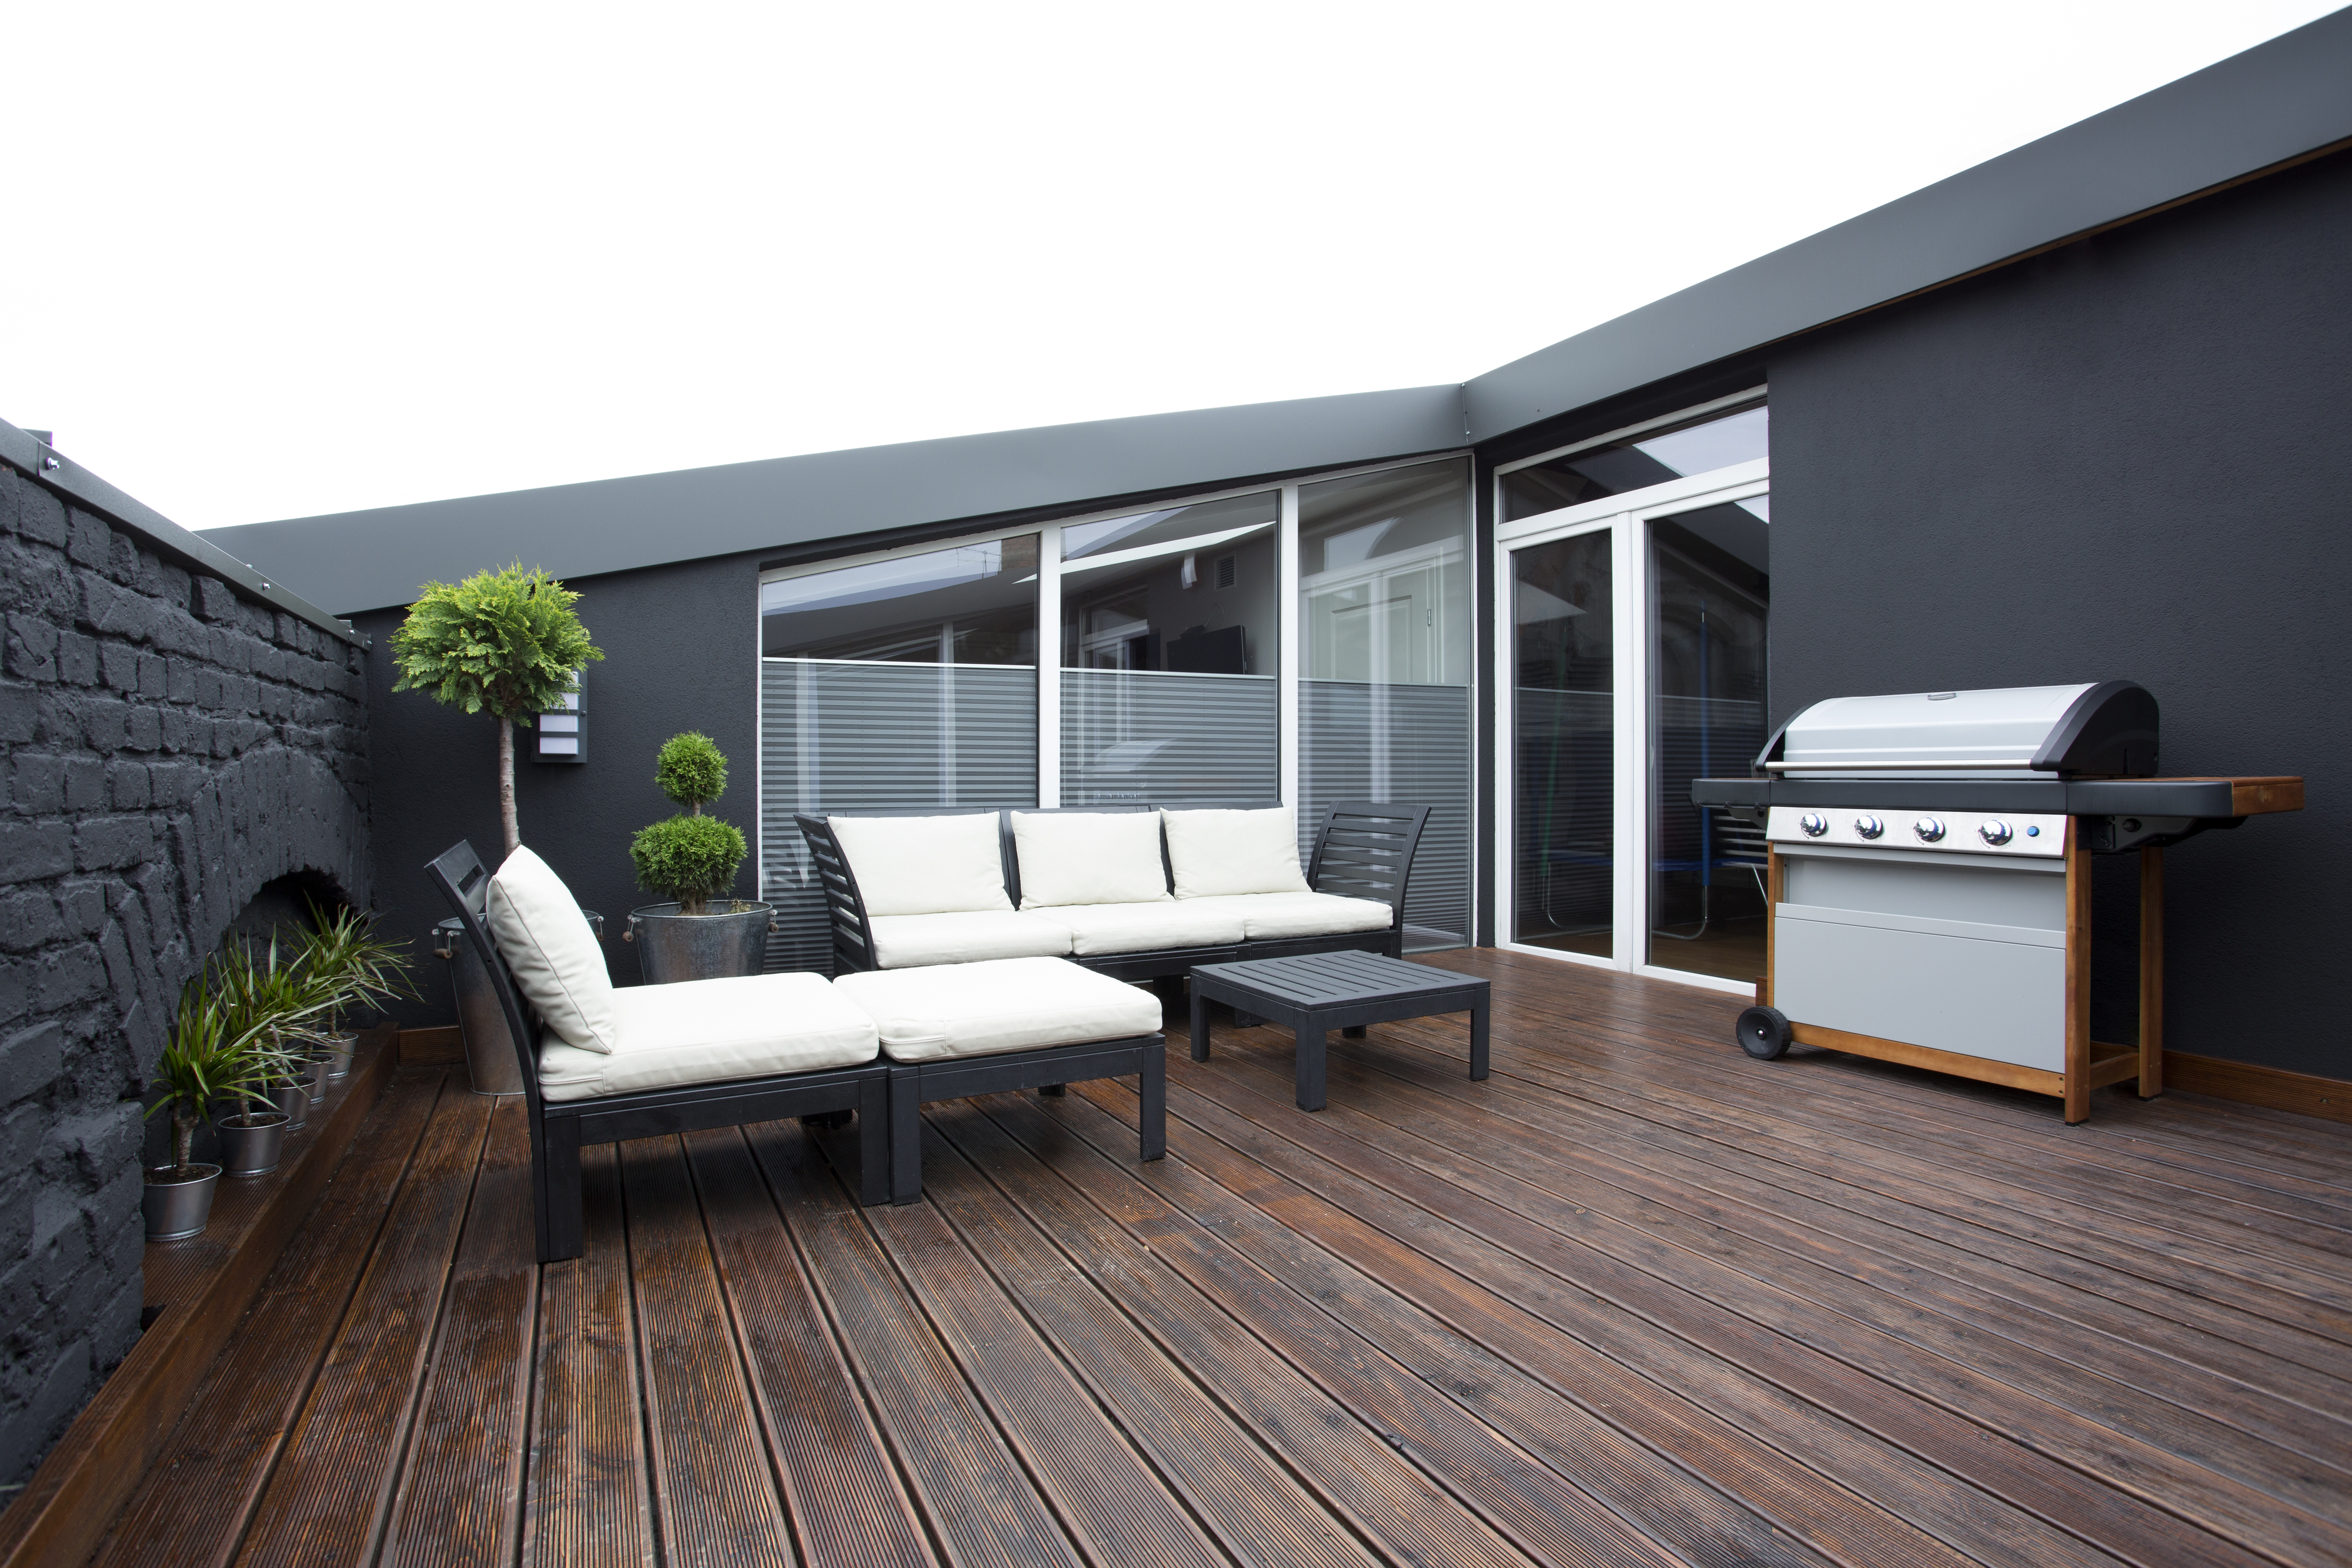 Outdoor patio for a house with a black exterior, with a seating area and a barbecue grill